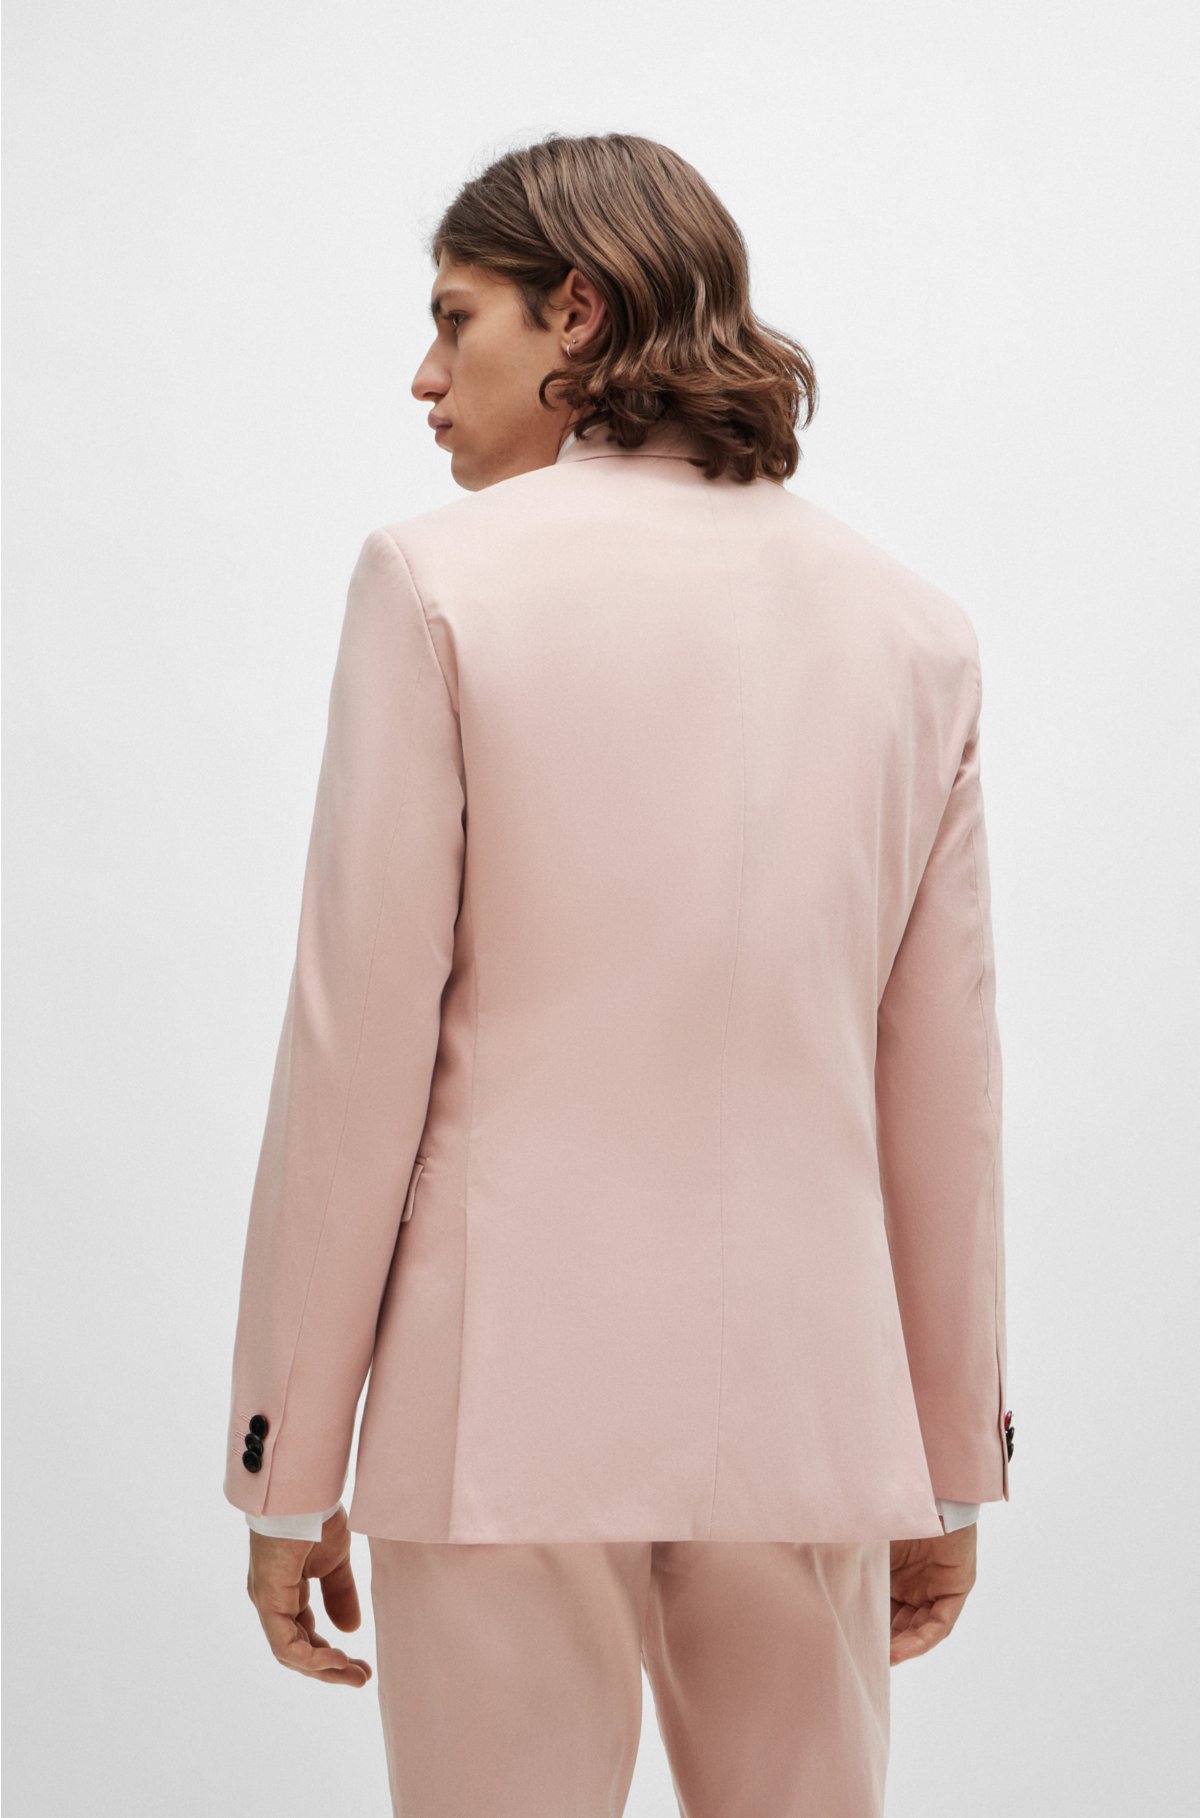 Extra-slim-fit suit in a lightweight cotton blend, light pink